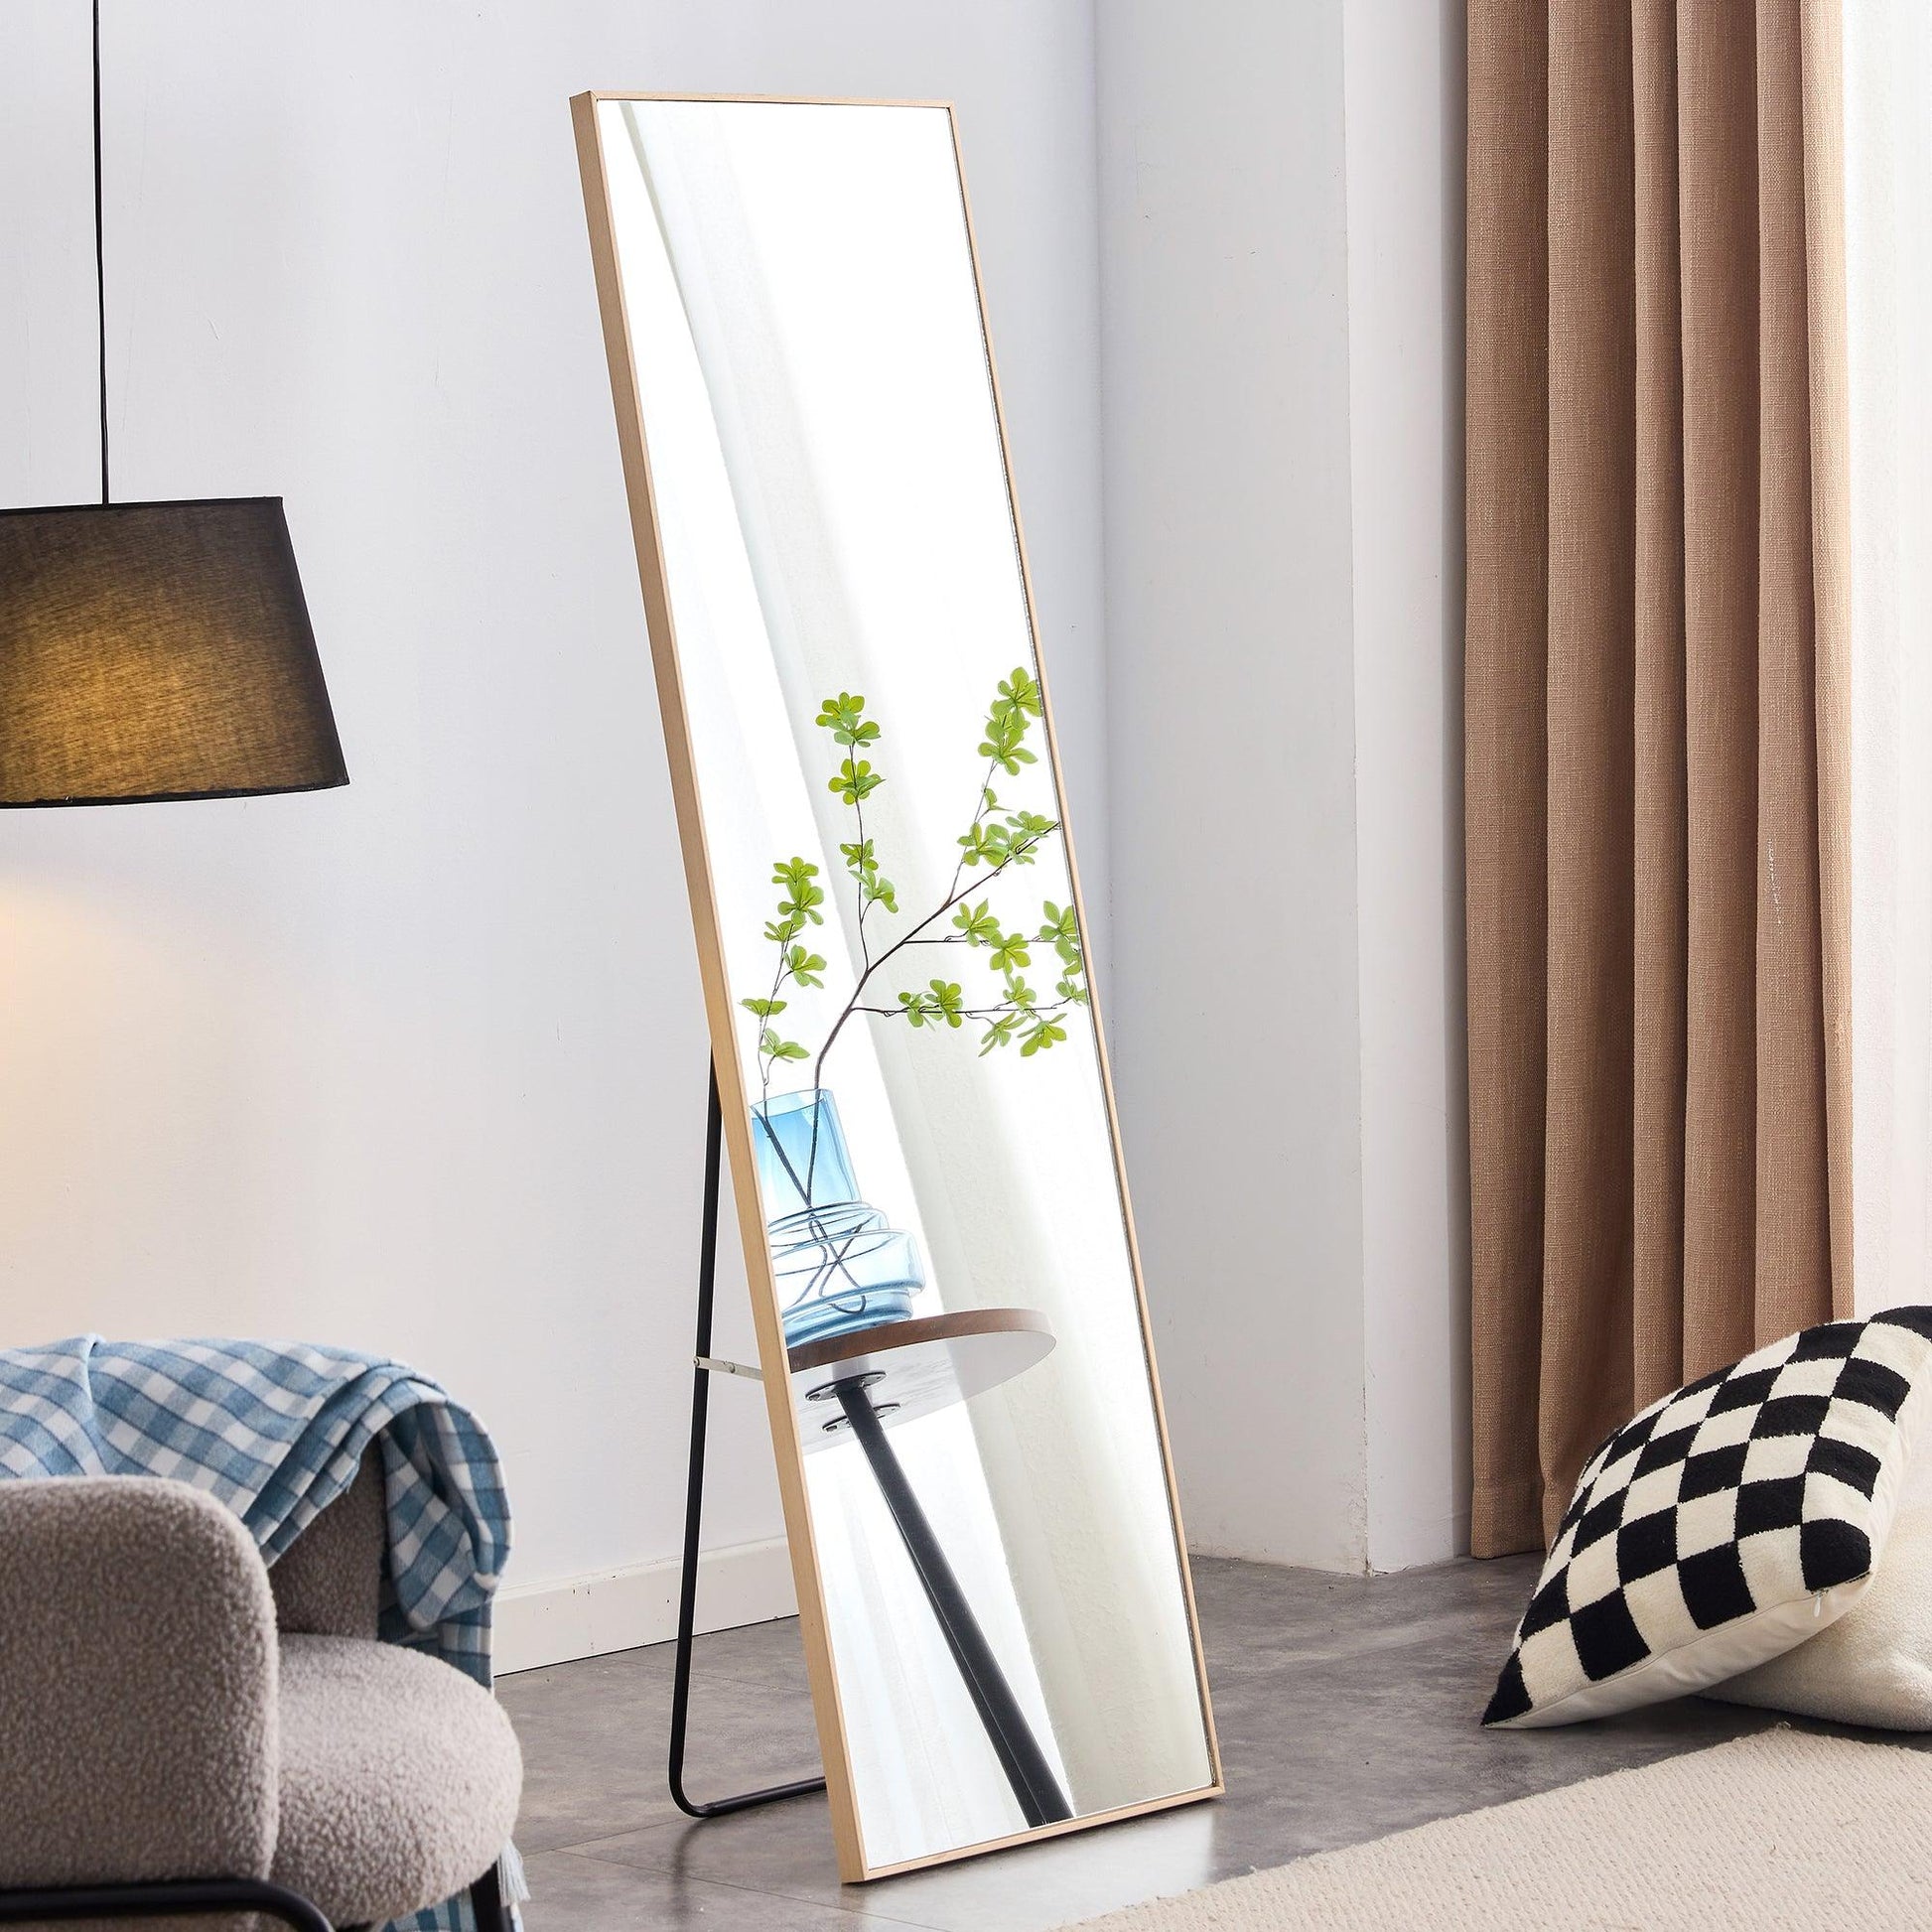 The3rd generation packaging upgrade includes a light oak solid wood frame full length mirror dressing mirror - FurniFindUSA